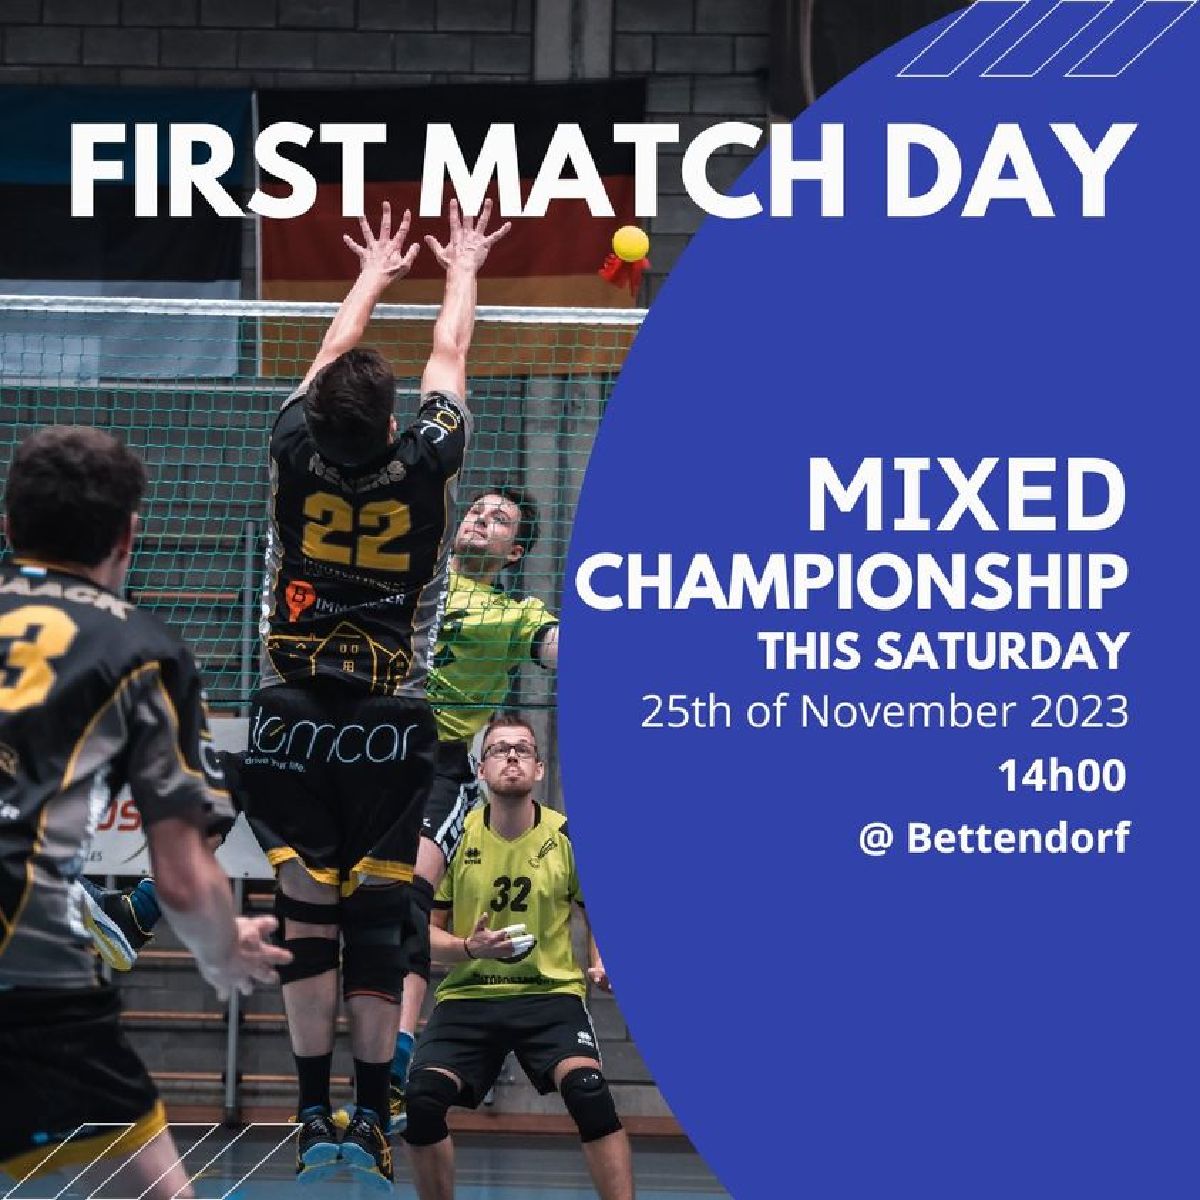 Mixed-Championship - First Match Day